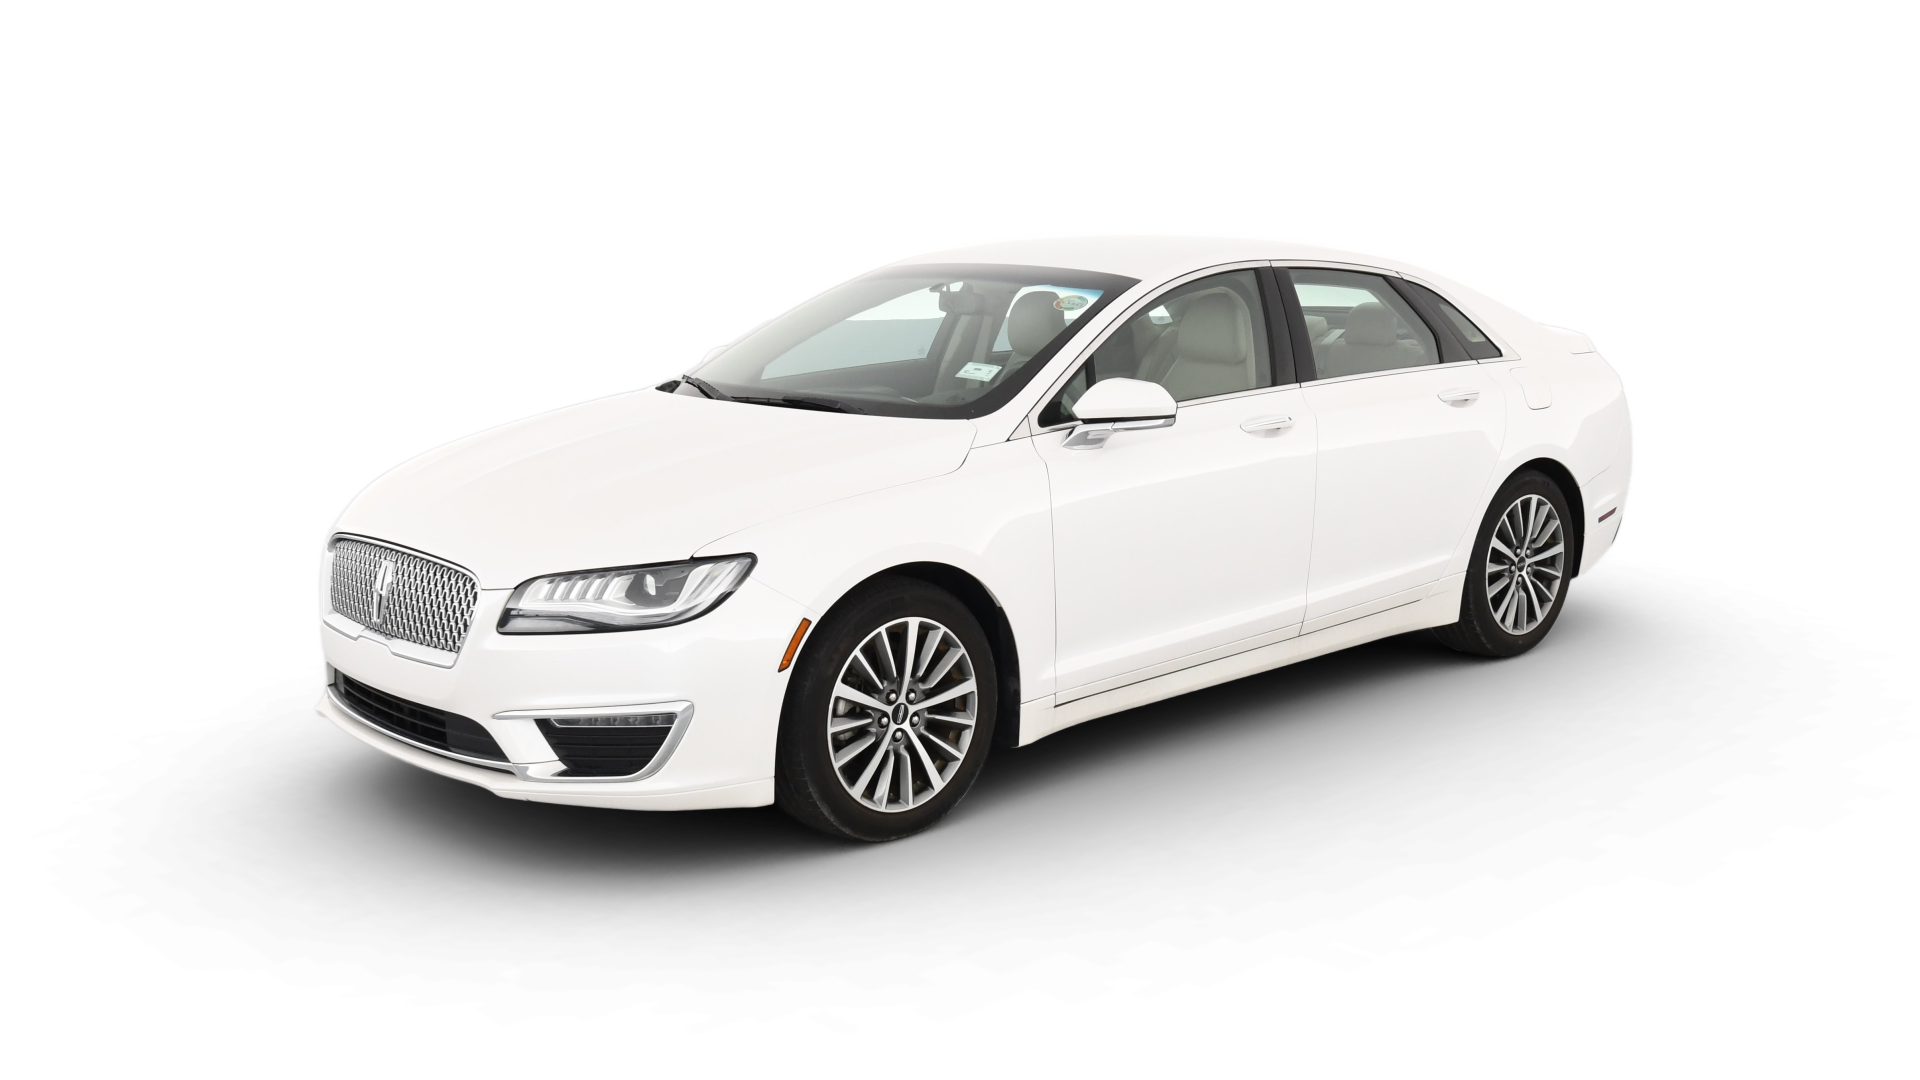 Used 2018 Lincoln MKZ For Sale Online | Carvana